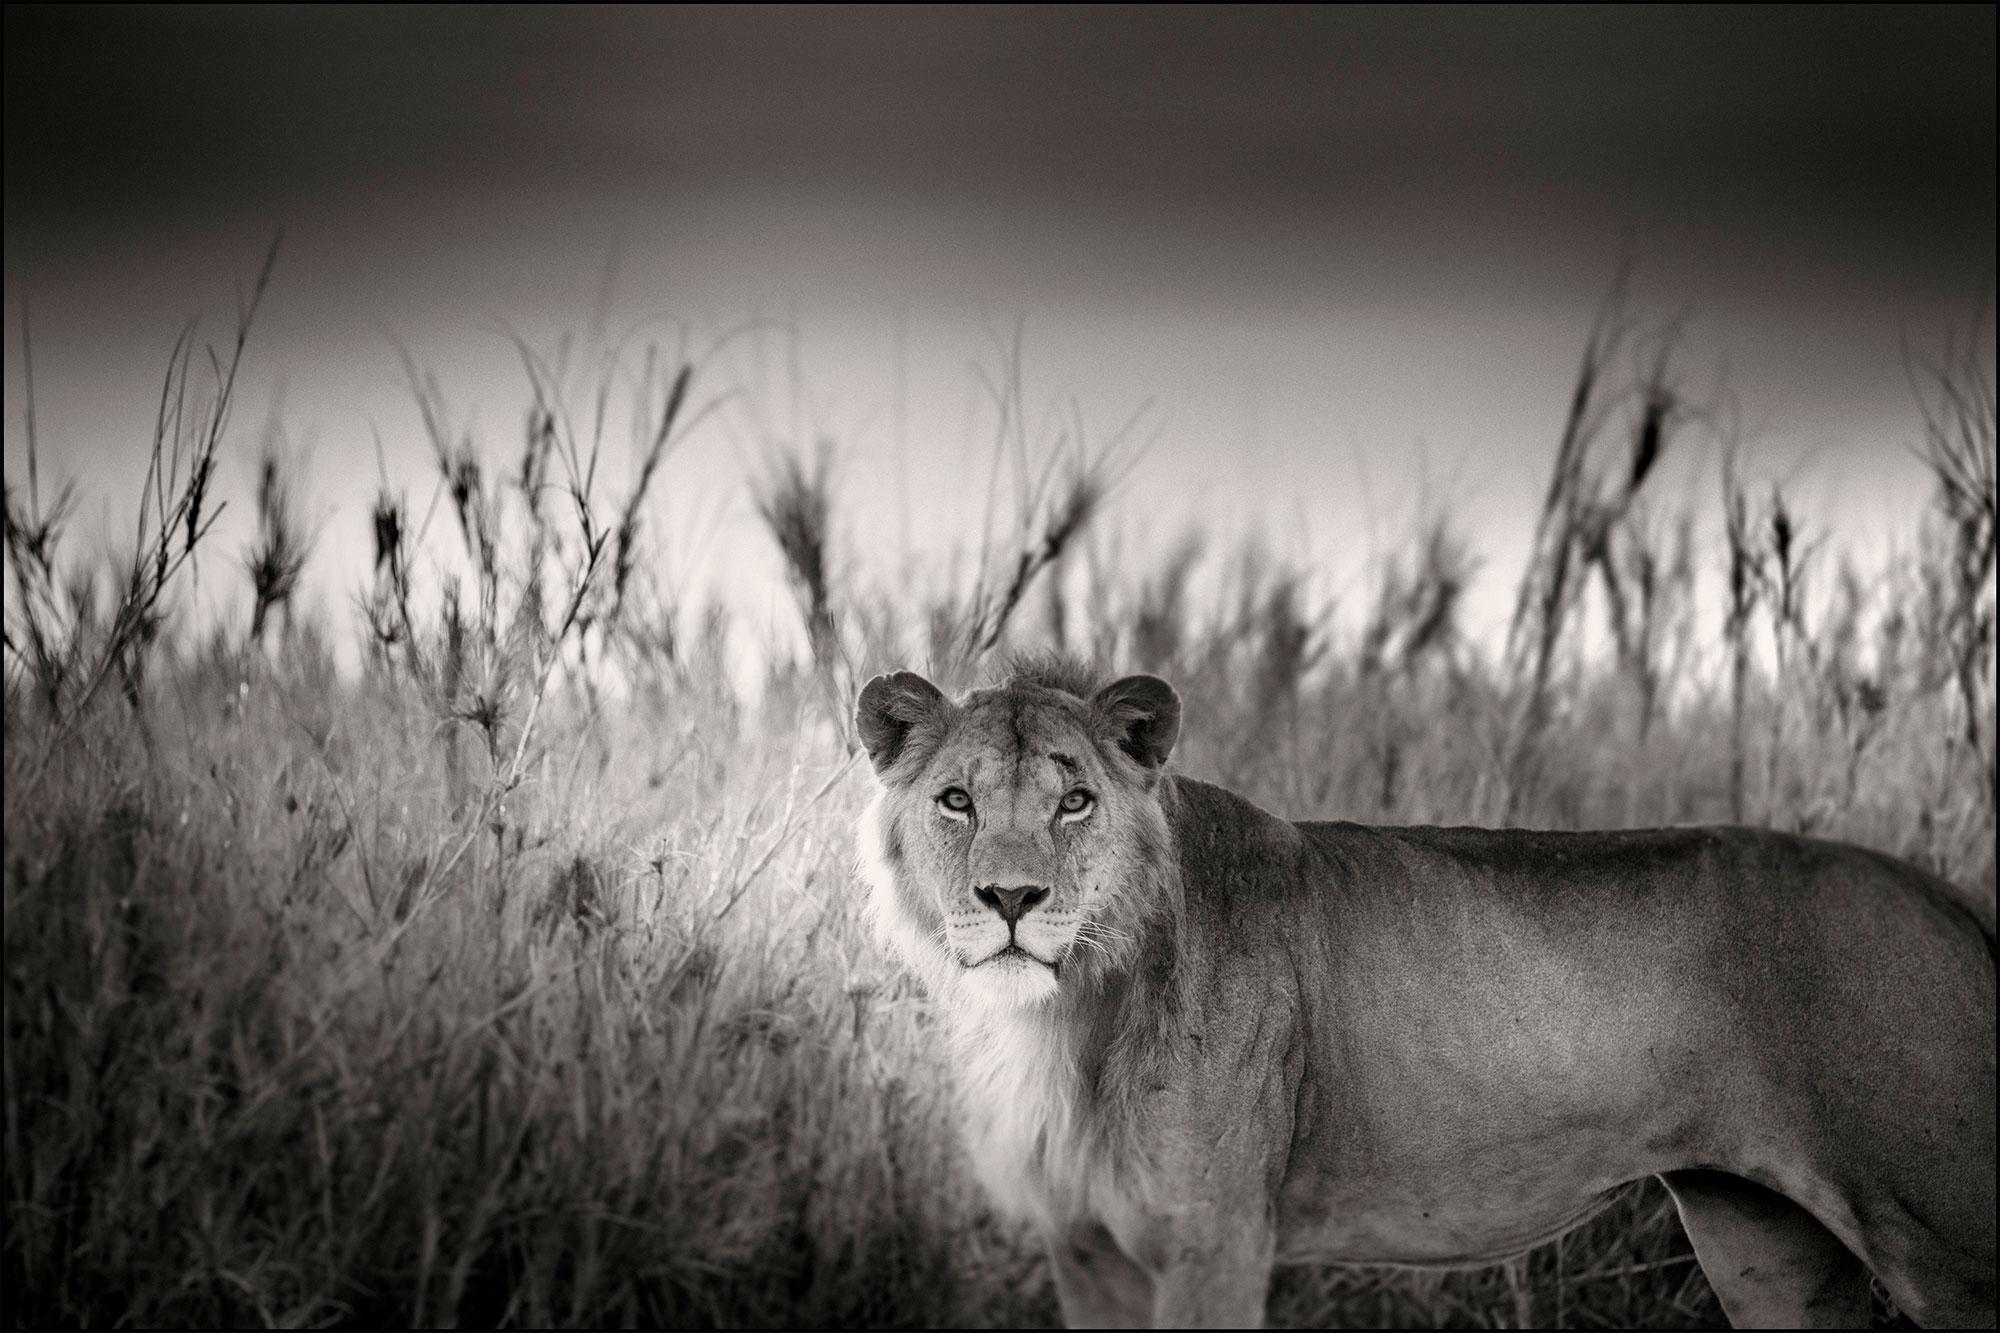 Joachim Schmeisser Black and White Photograph - Successor, africa, Lion, animal, wildlife, black and white photography